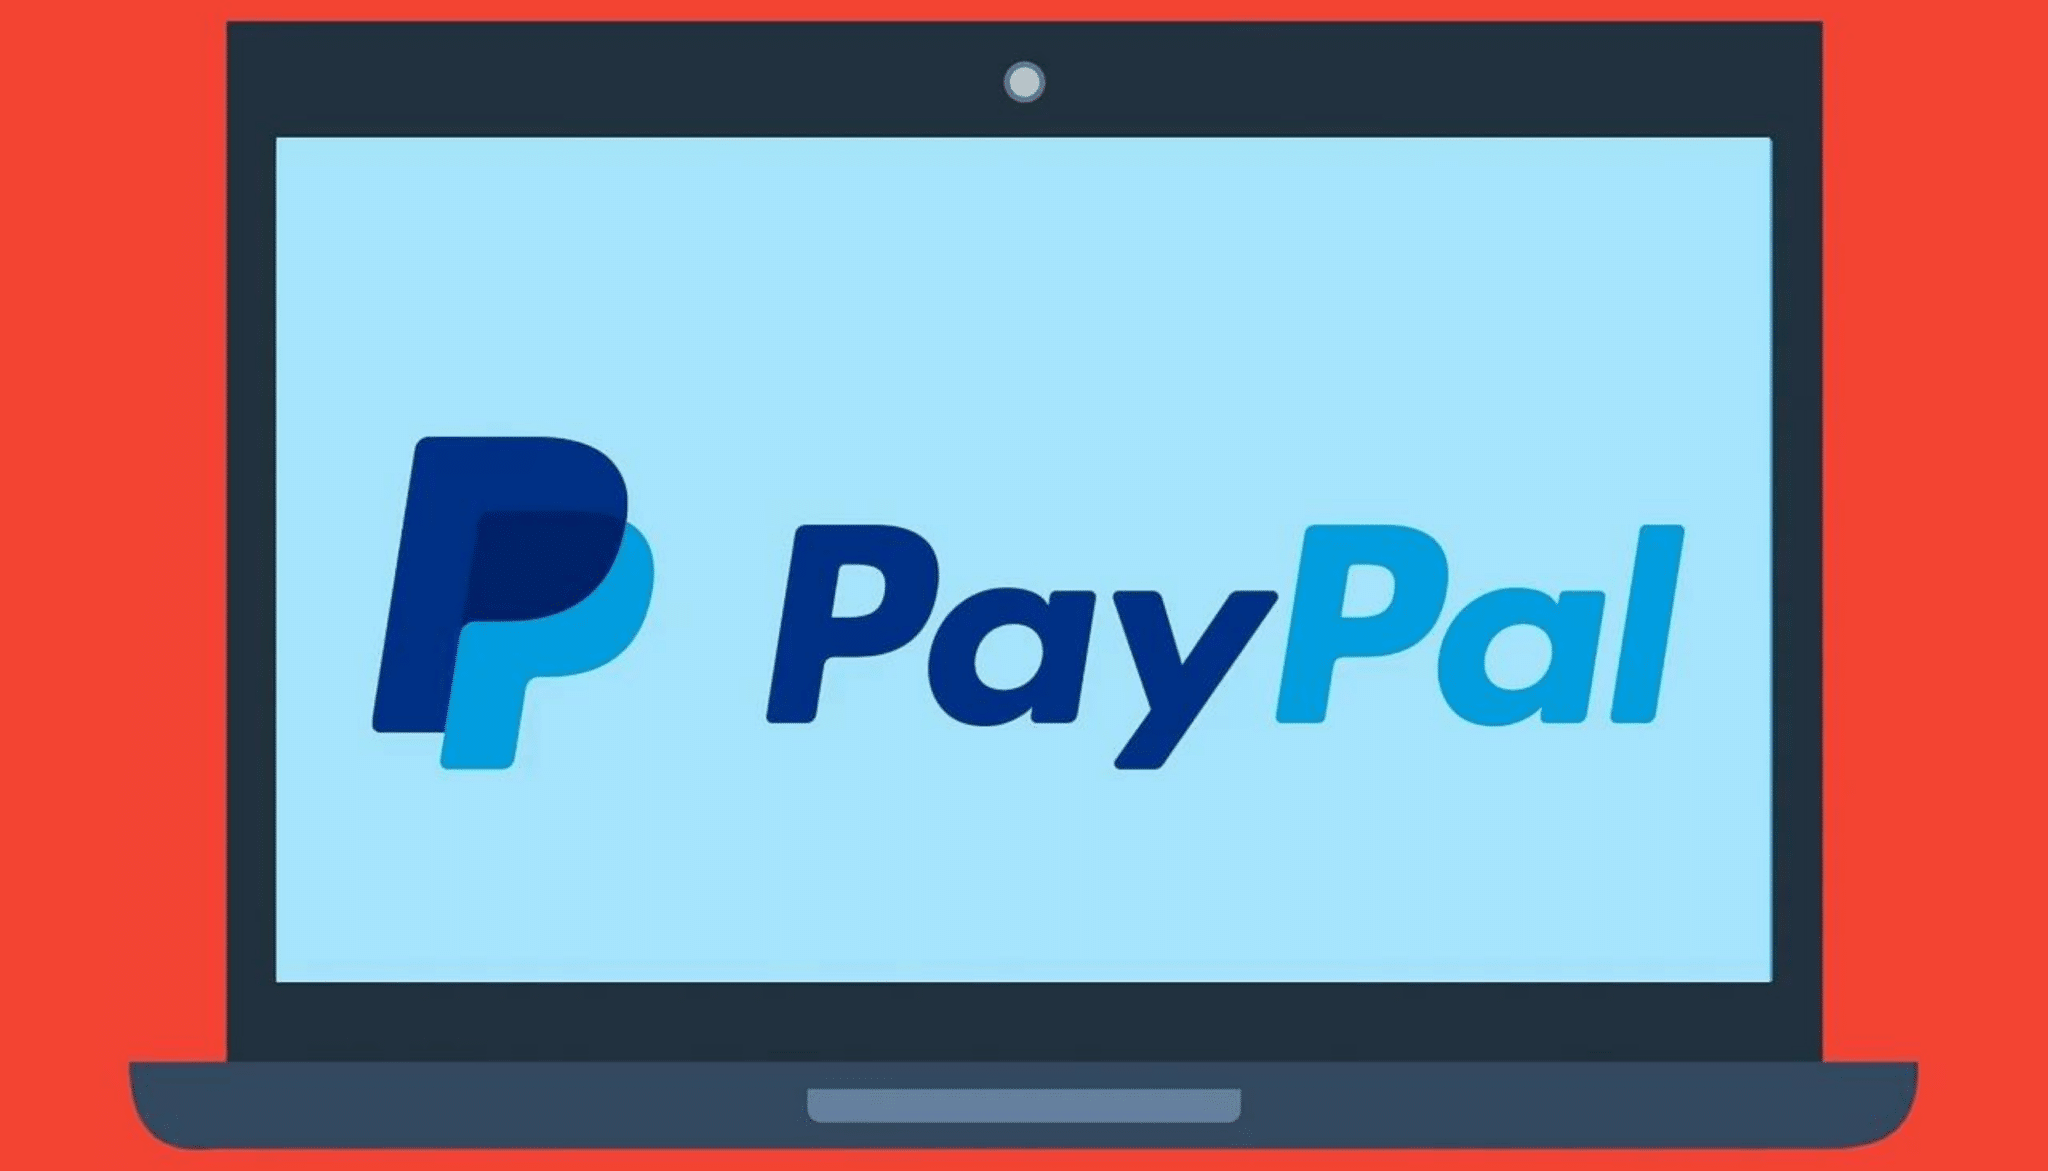 #PayPal launching ad network fueled by user purchase data